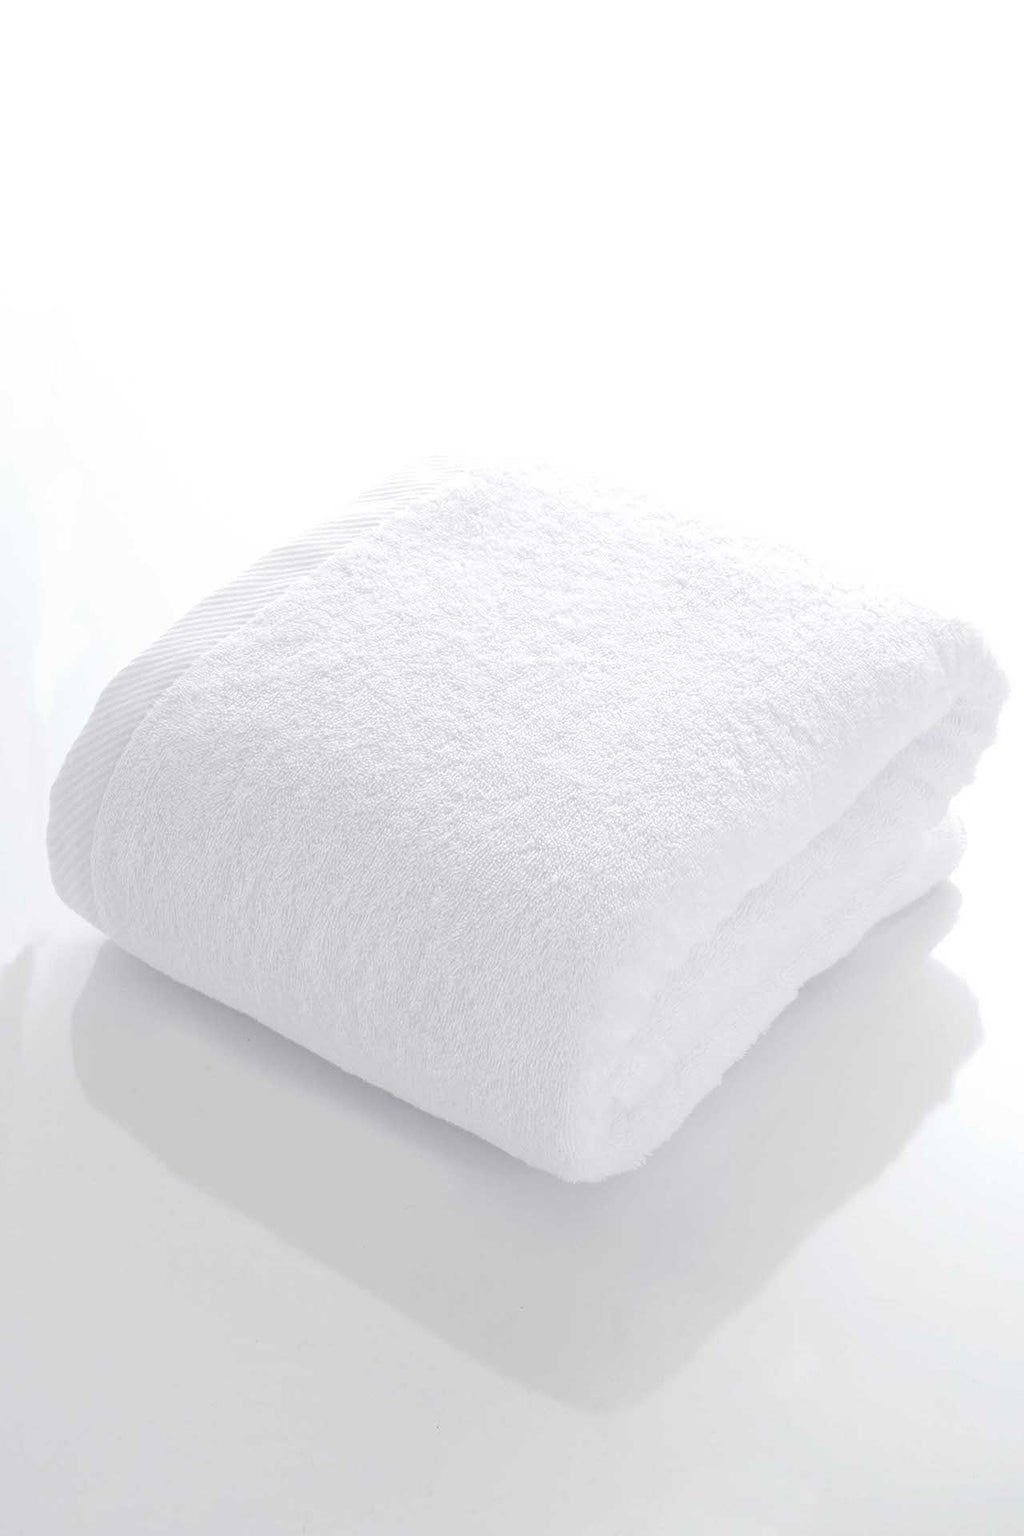 Thirsty Towels Turkish Cotton Extra Large Plush Spa Bath Sheet Towel in White Towel